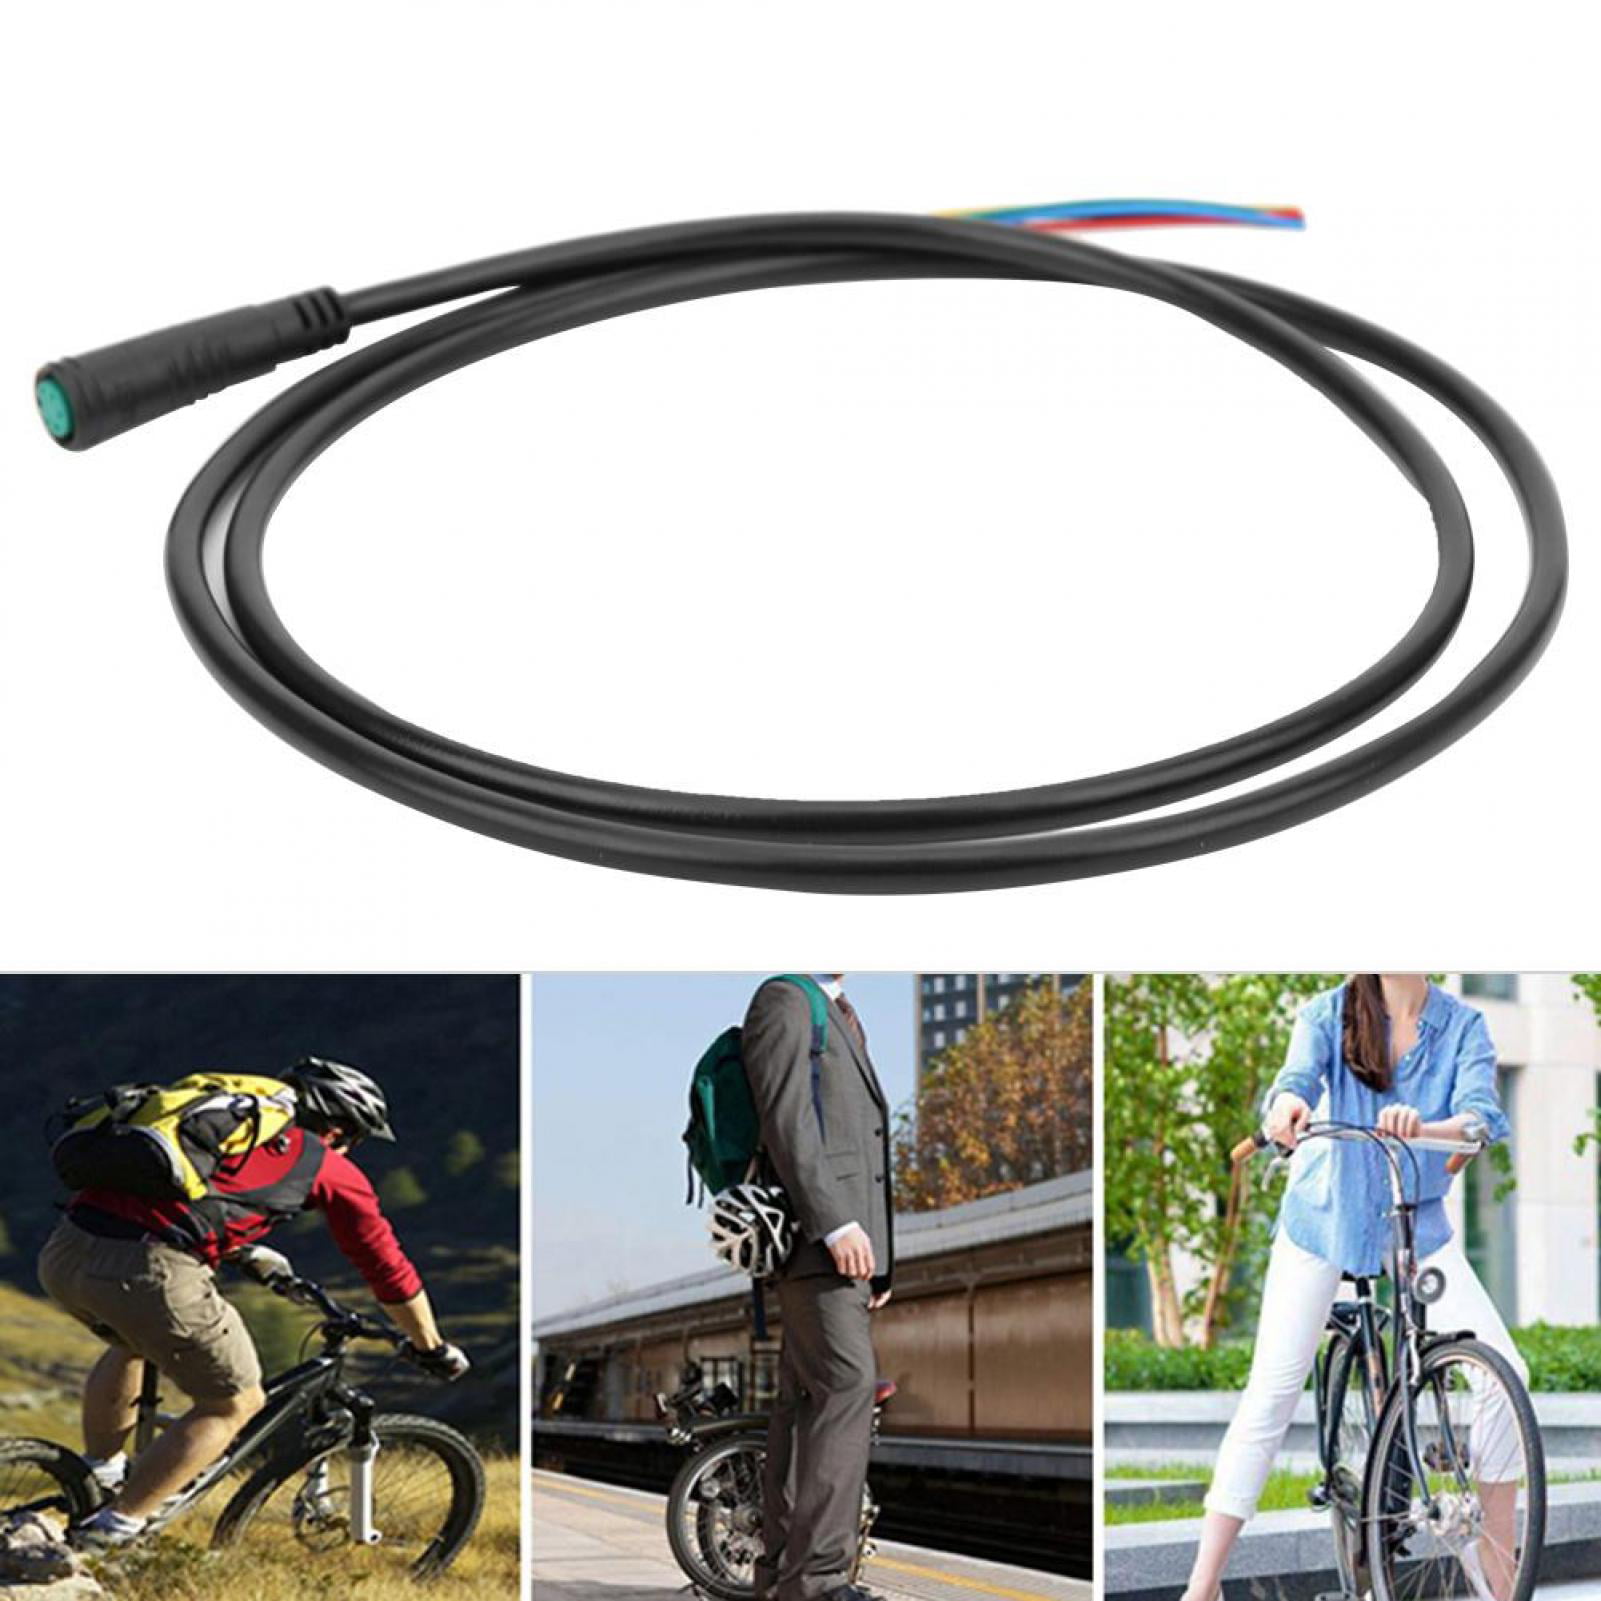 wear Robust Durable Bike Lithium Battery Modification Part Mixture Material Practical Bicycle 2 Core Signal Cable for School Sports for Trail Riding 